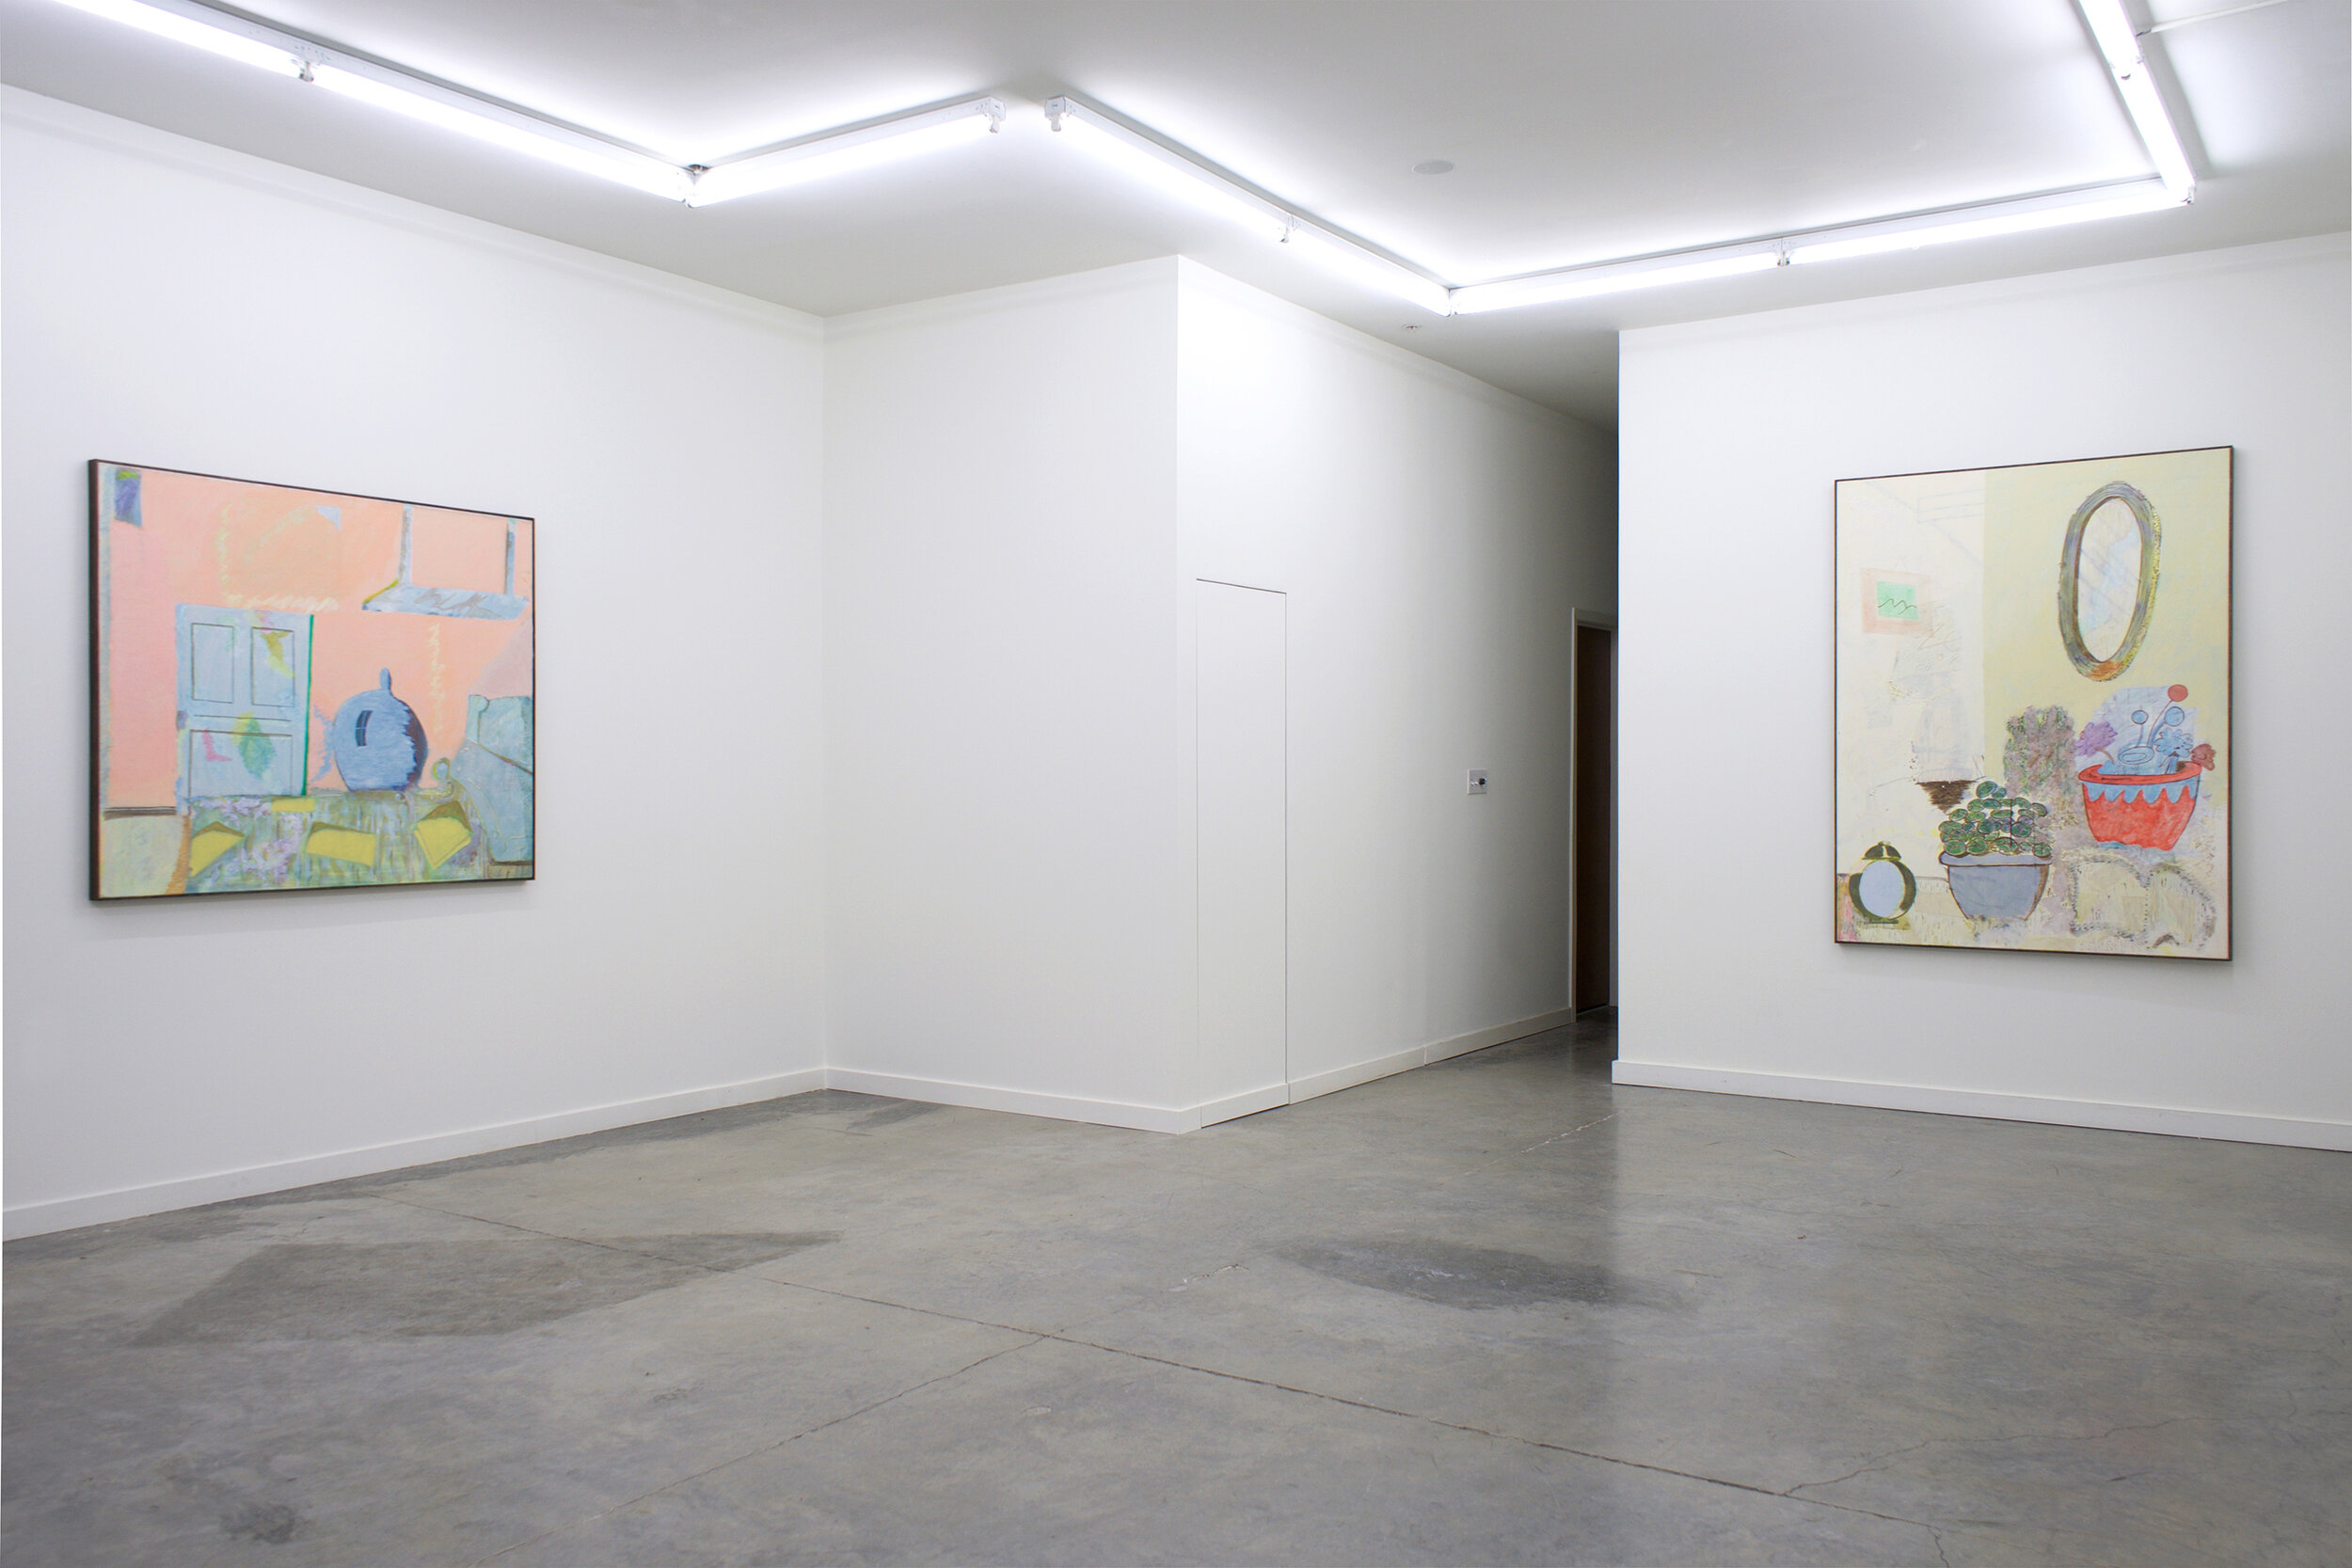  CHRISTOPH ROßNER  Time Is On My Side  Installation View 